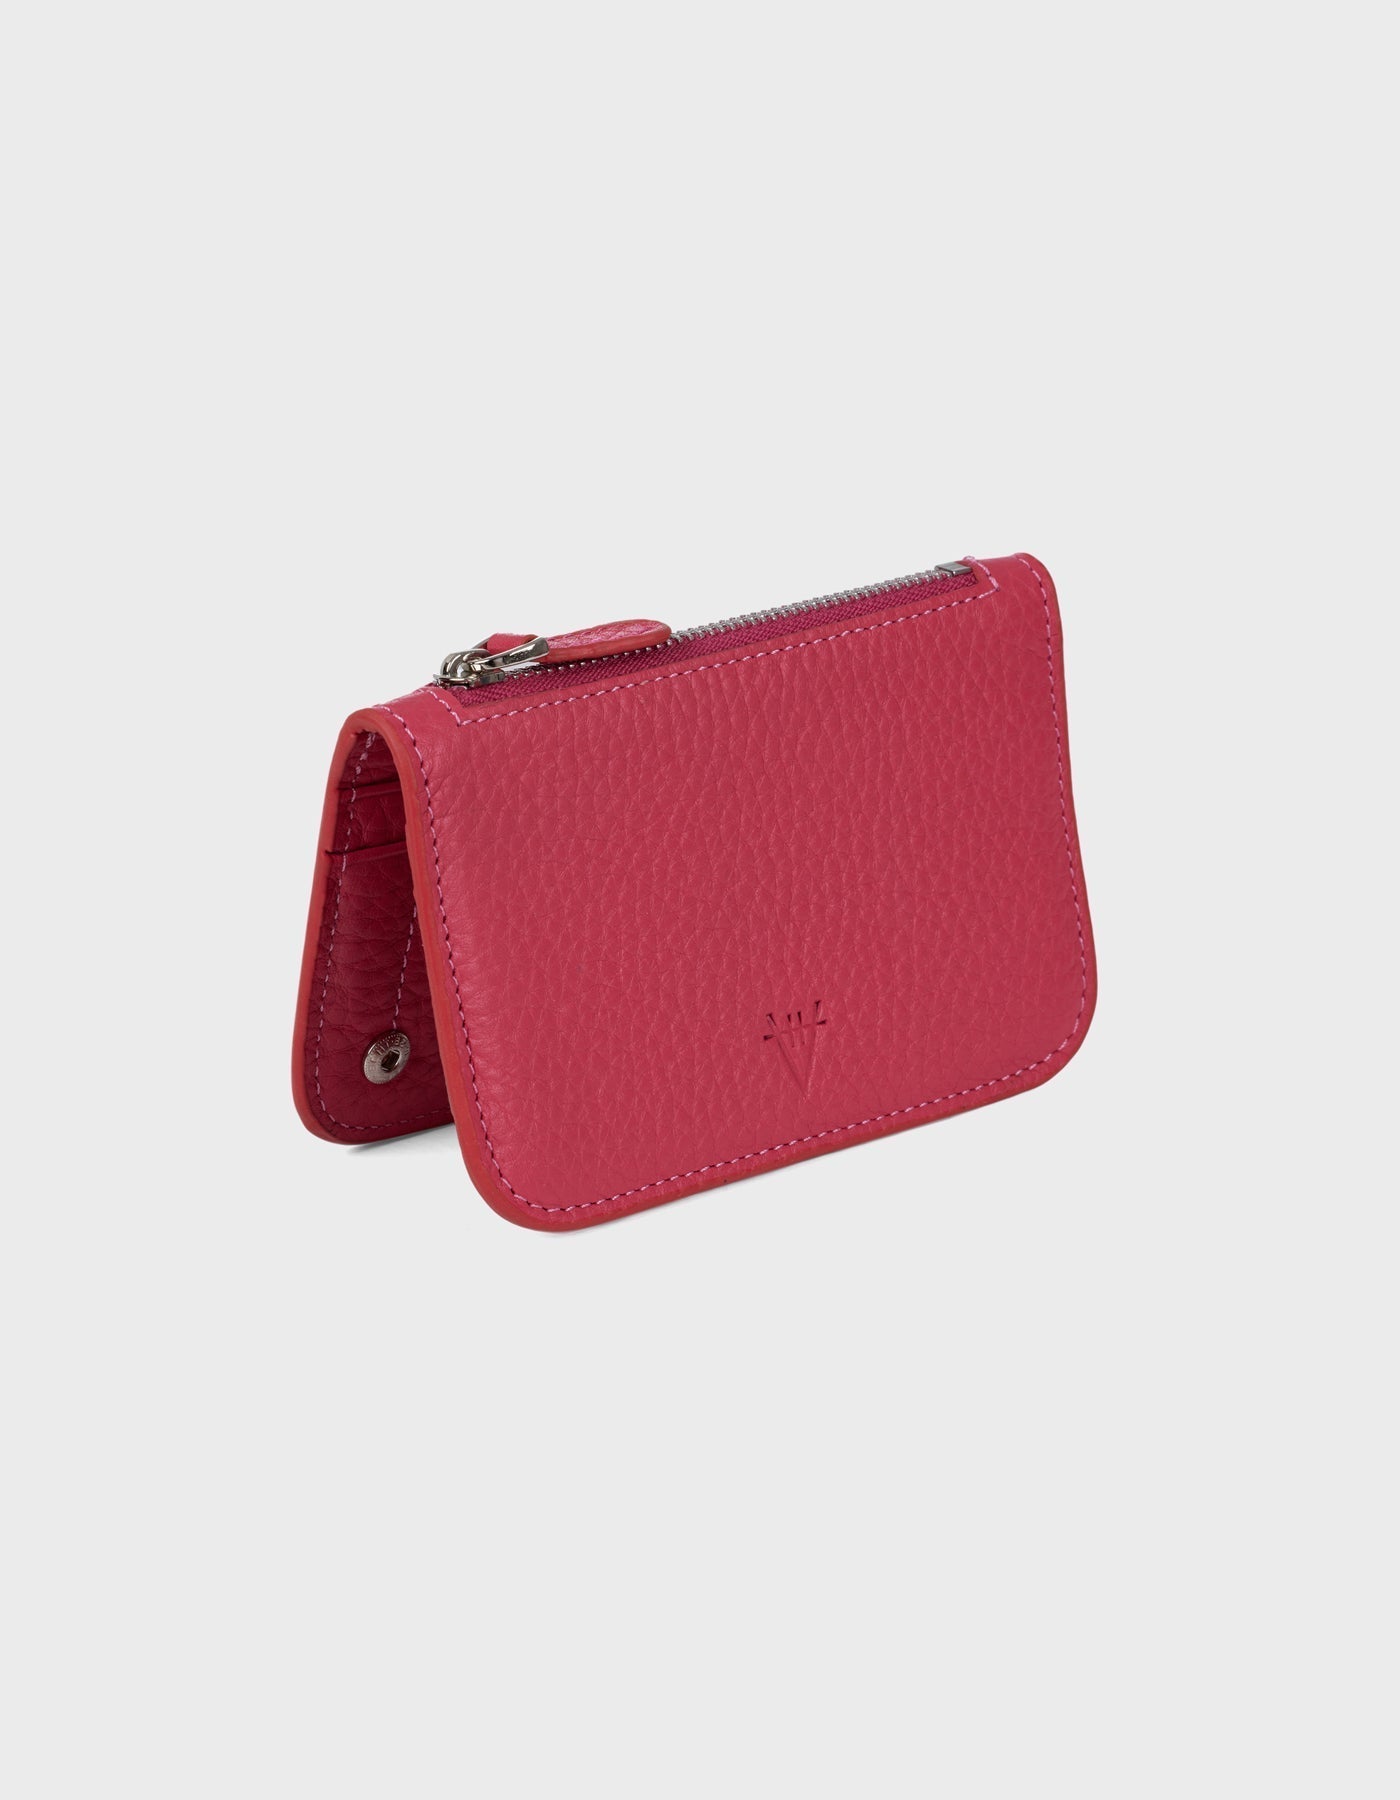 Hiva Atelier - Alae Coin Purse & Card Holder Coral